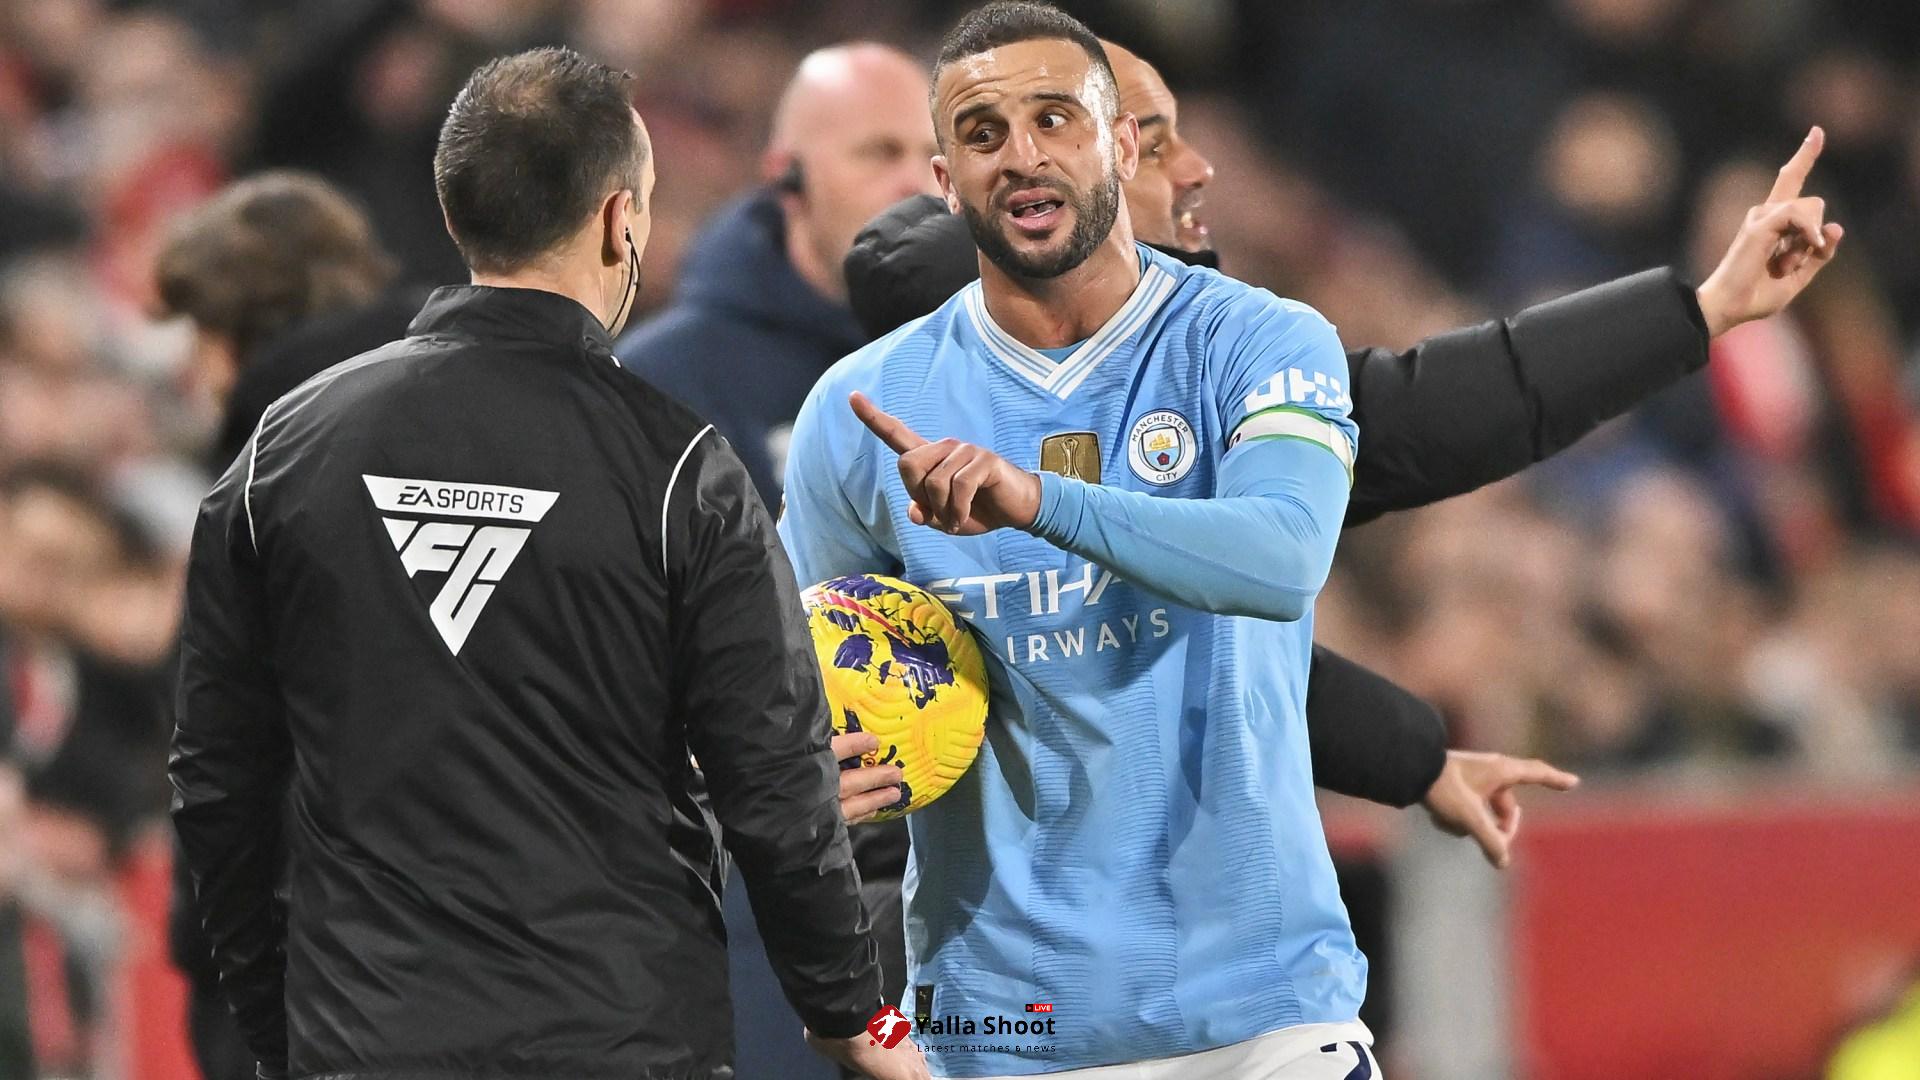 Kyle Walker left raging after on-field bust-up with Neal Maupay during Man City's win at Brentford